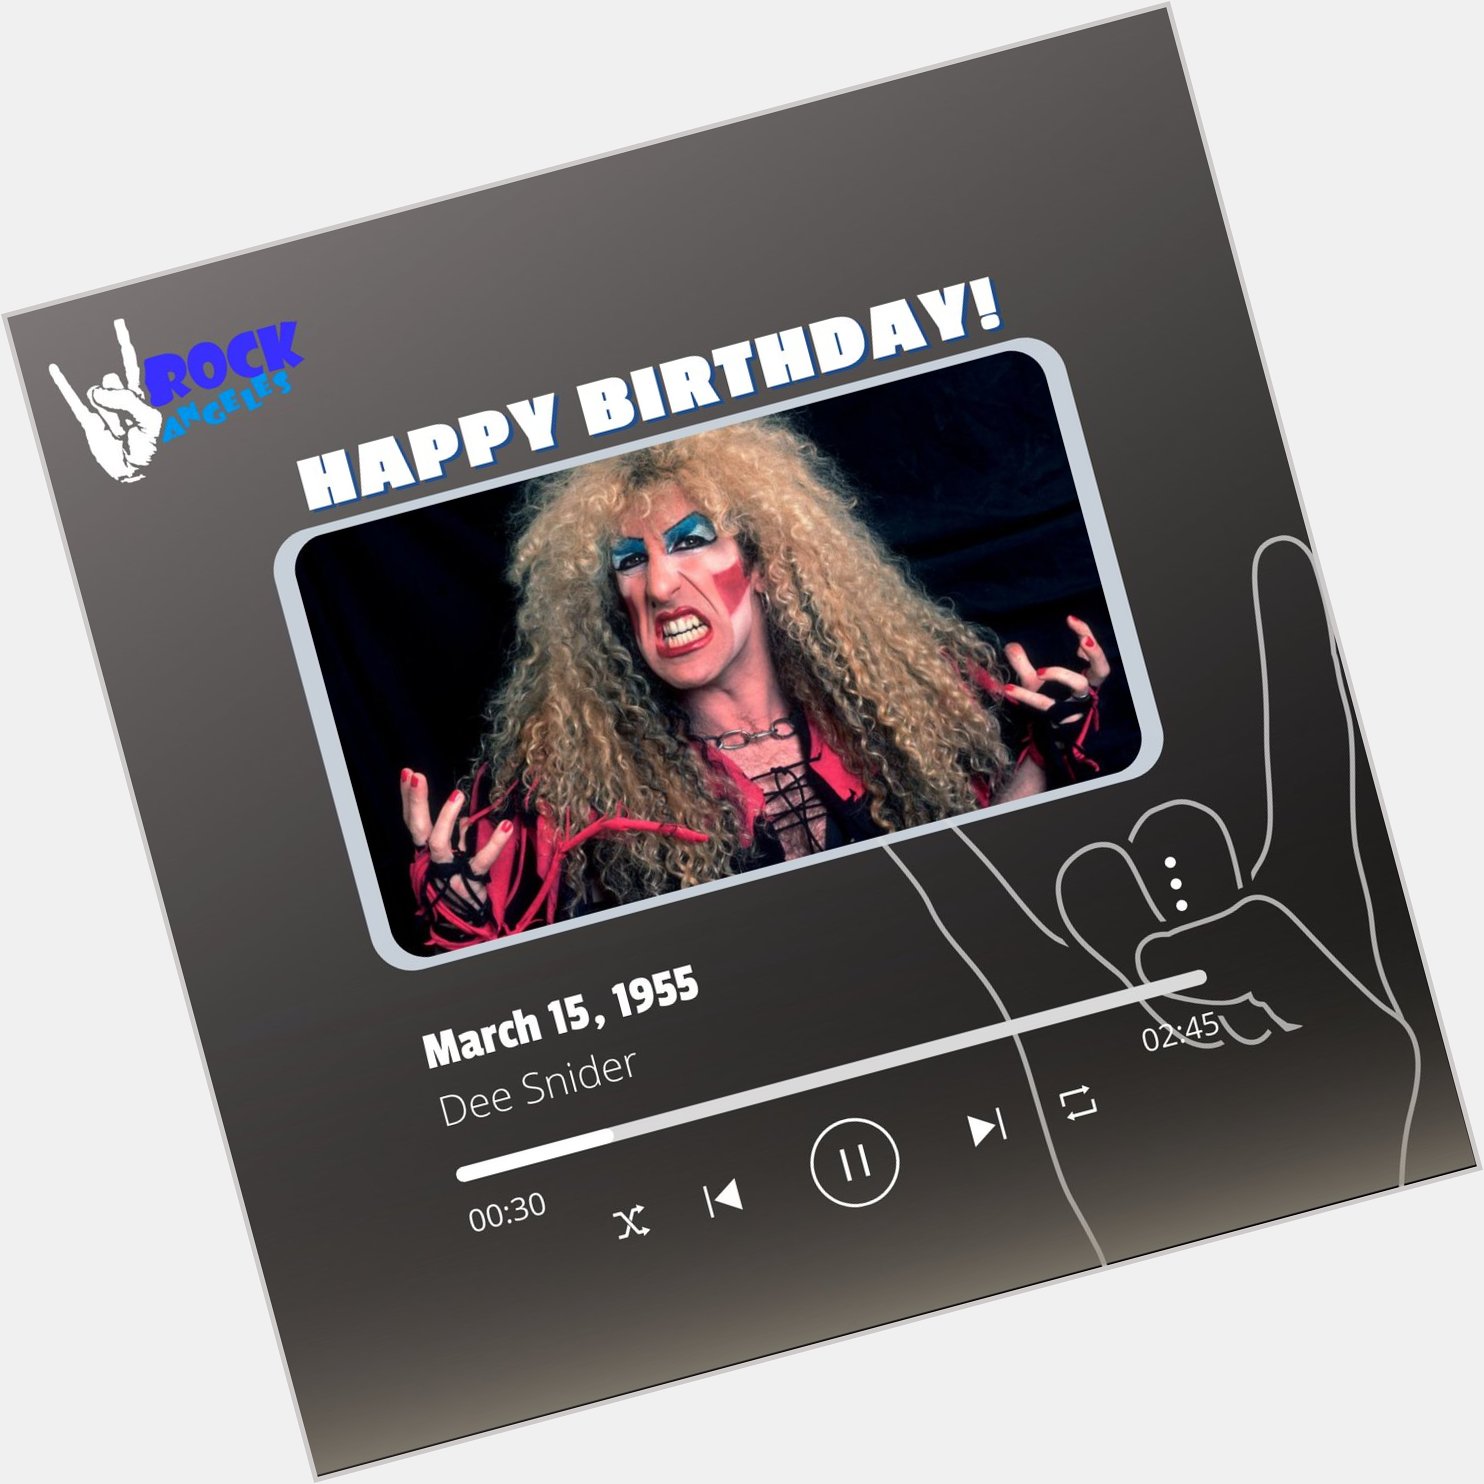 Happy Birthday to the one and only, our favorite Twisted Sister, Dee Snider! 